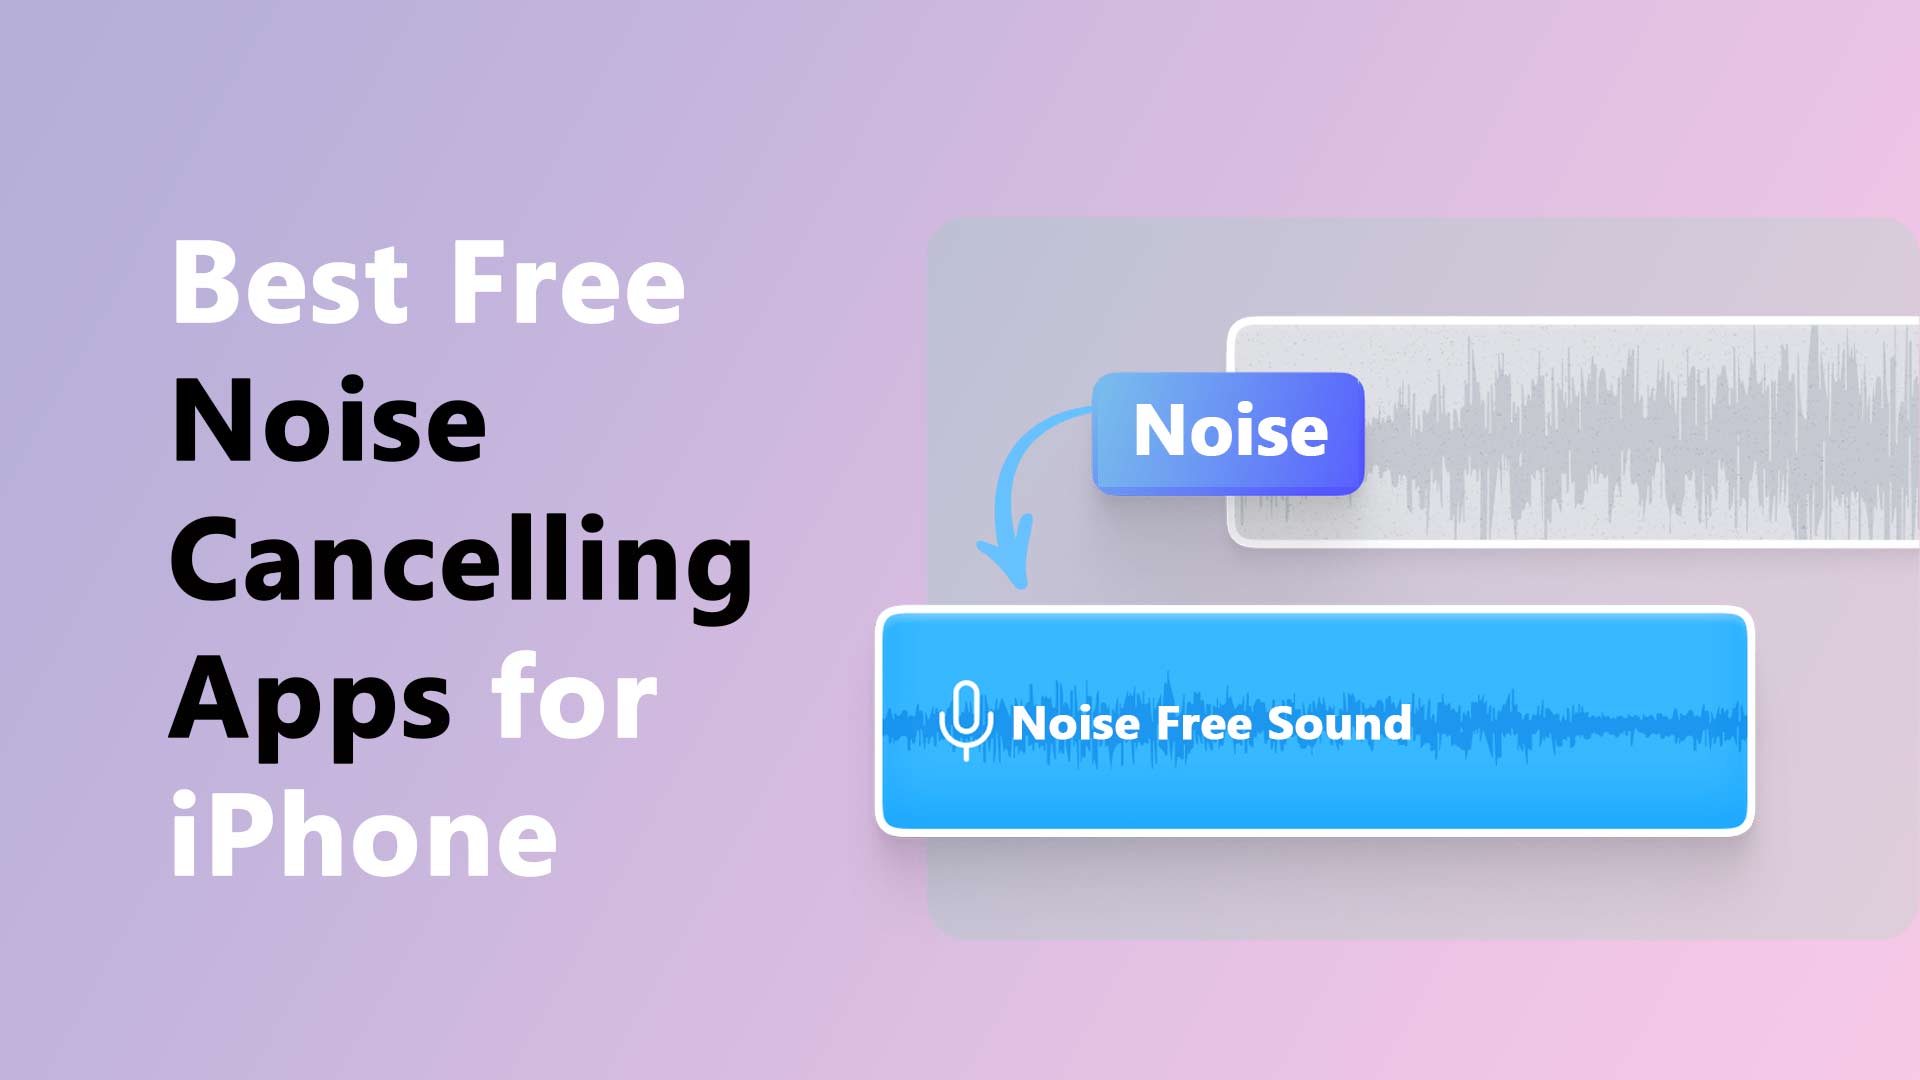 Best free noise cancelling apps for iPhone